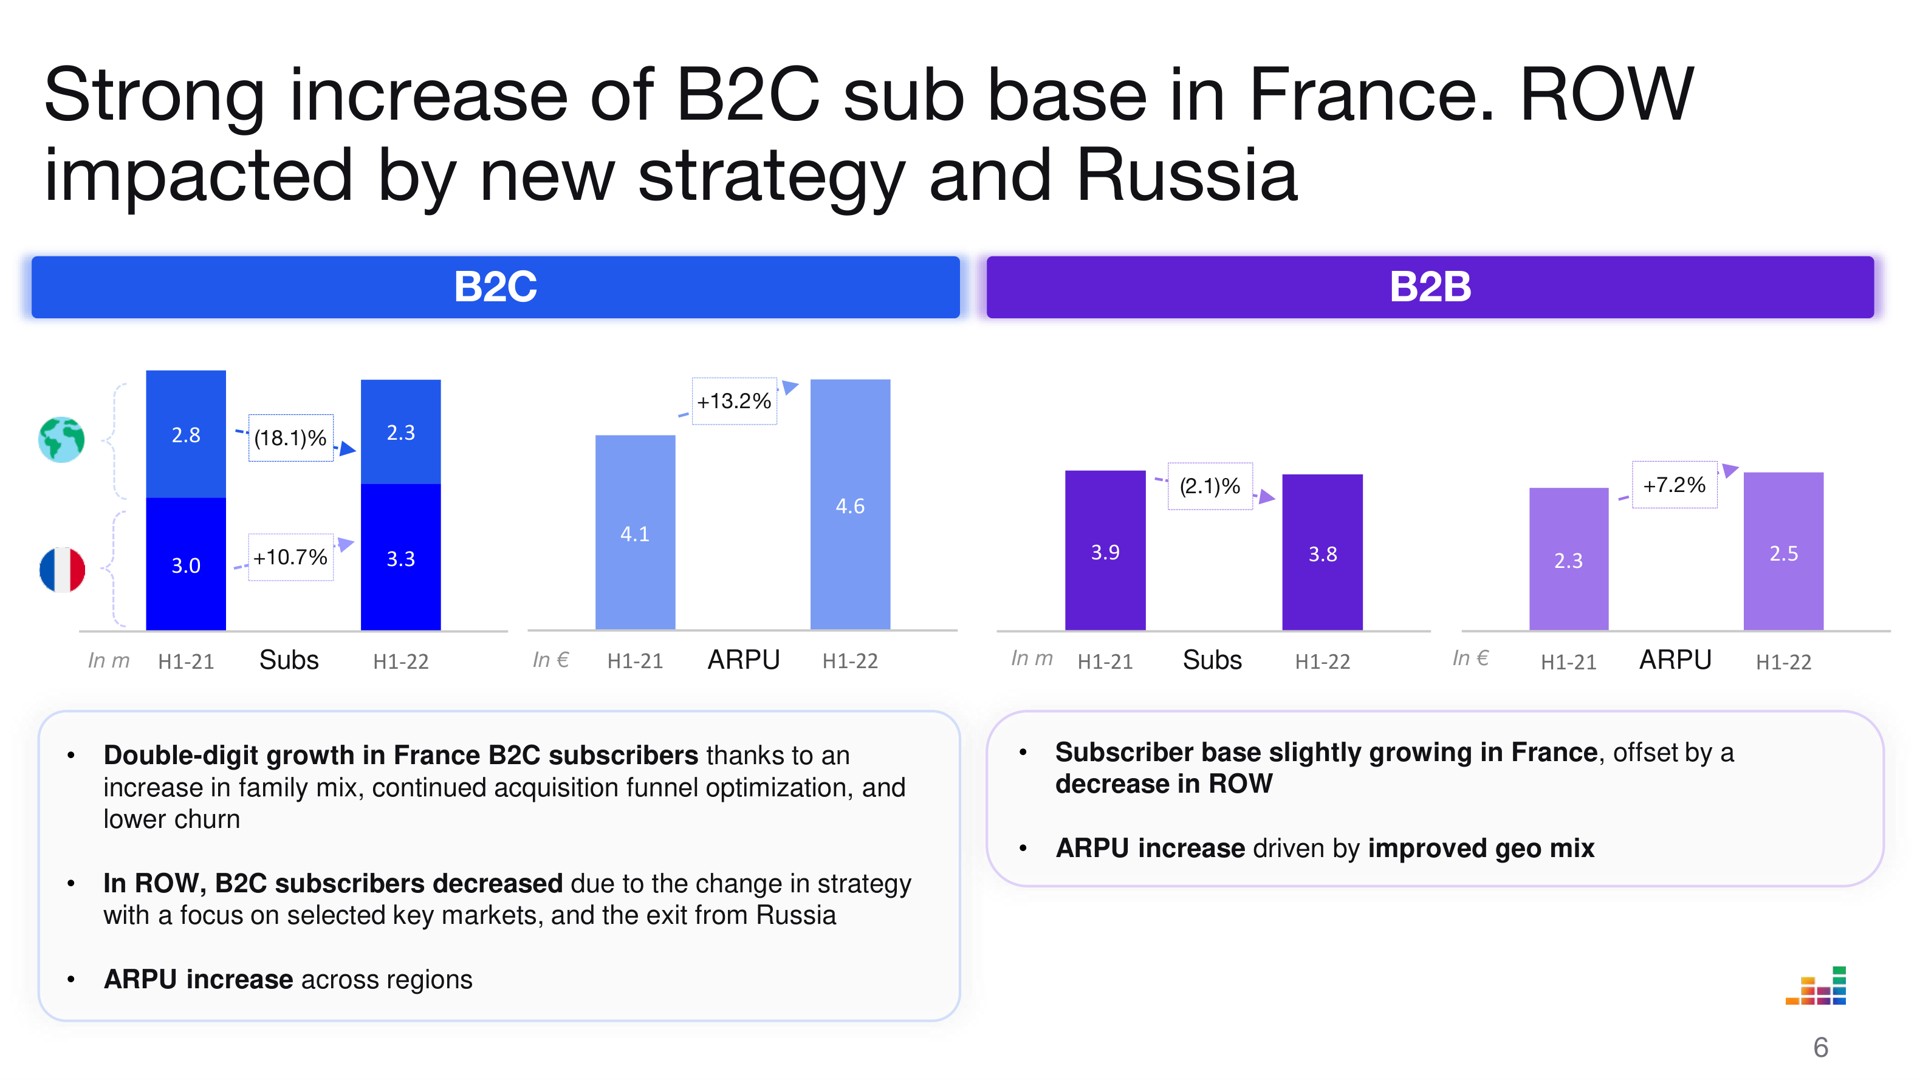 strong increase of sub base in row impacted by new strategy and russia | Deezer